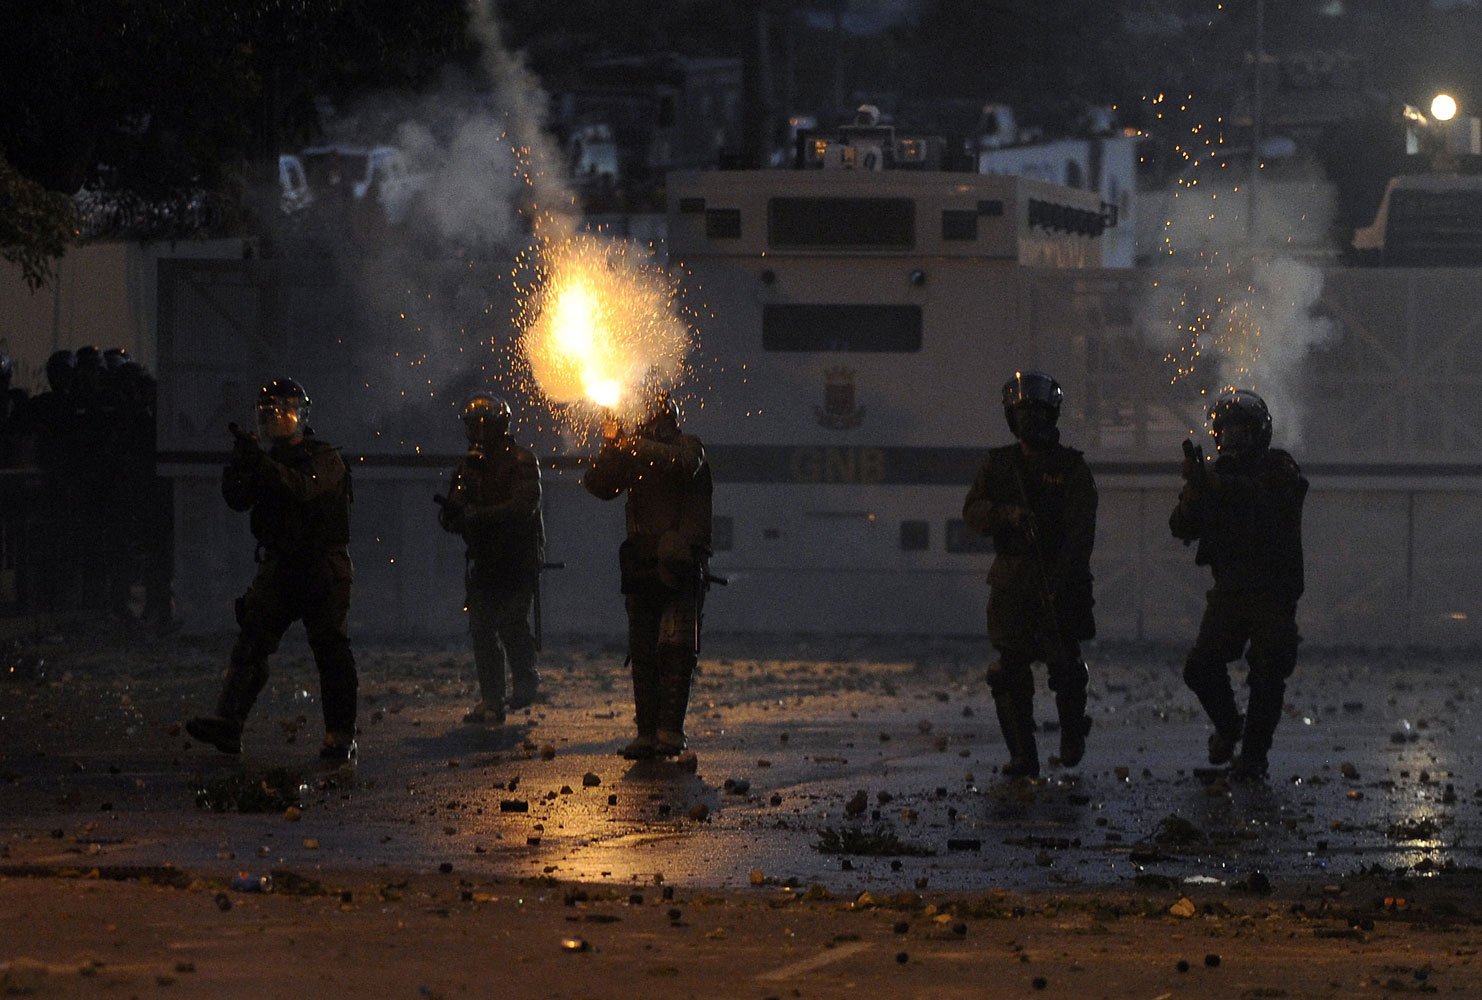 Members of the National Guard shoot during a protest against the government of Venezuelan President Nicolas Maduro, in Caracas on March 2, 2014.